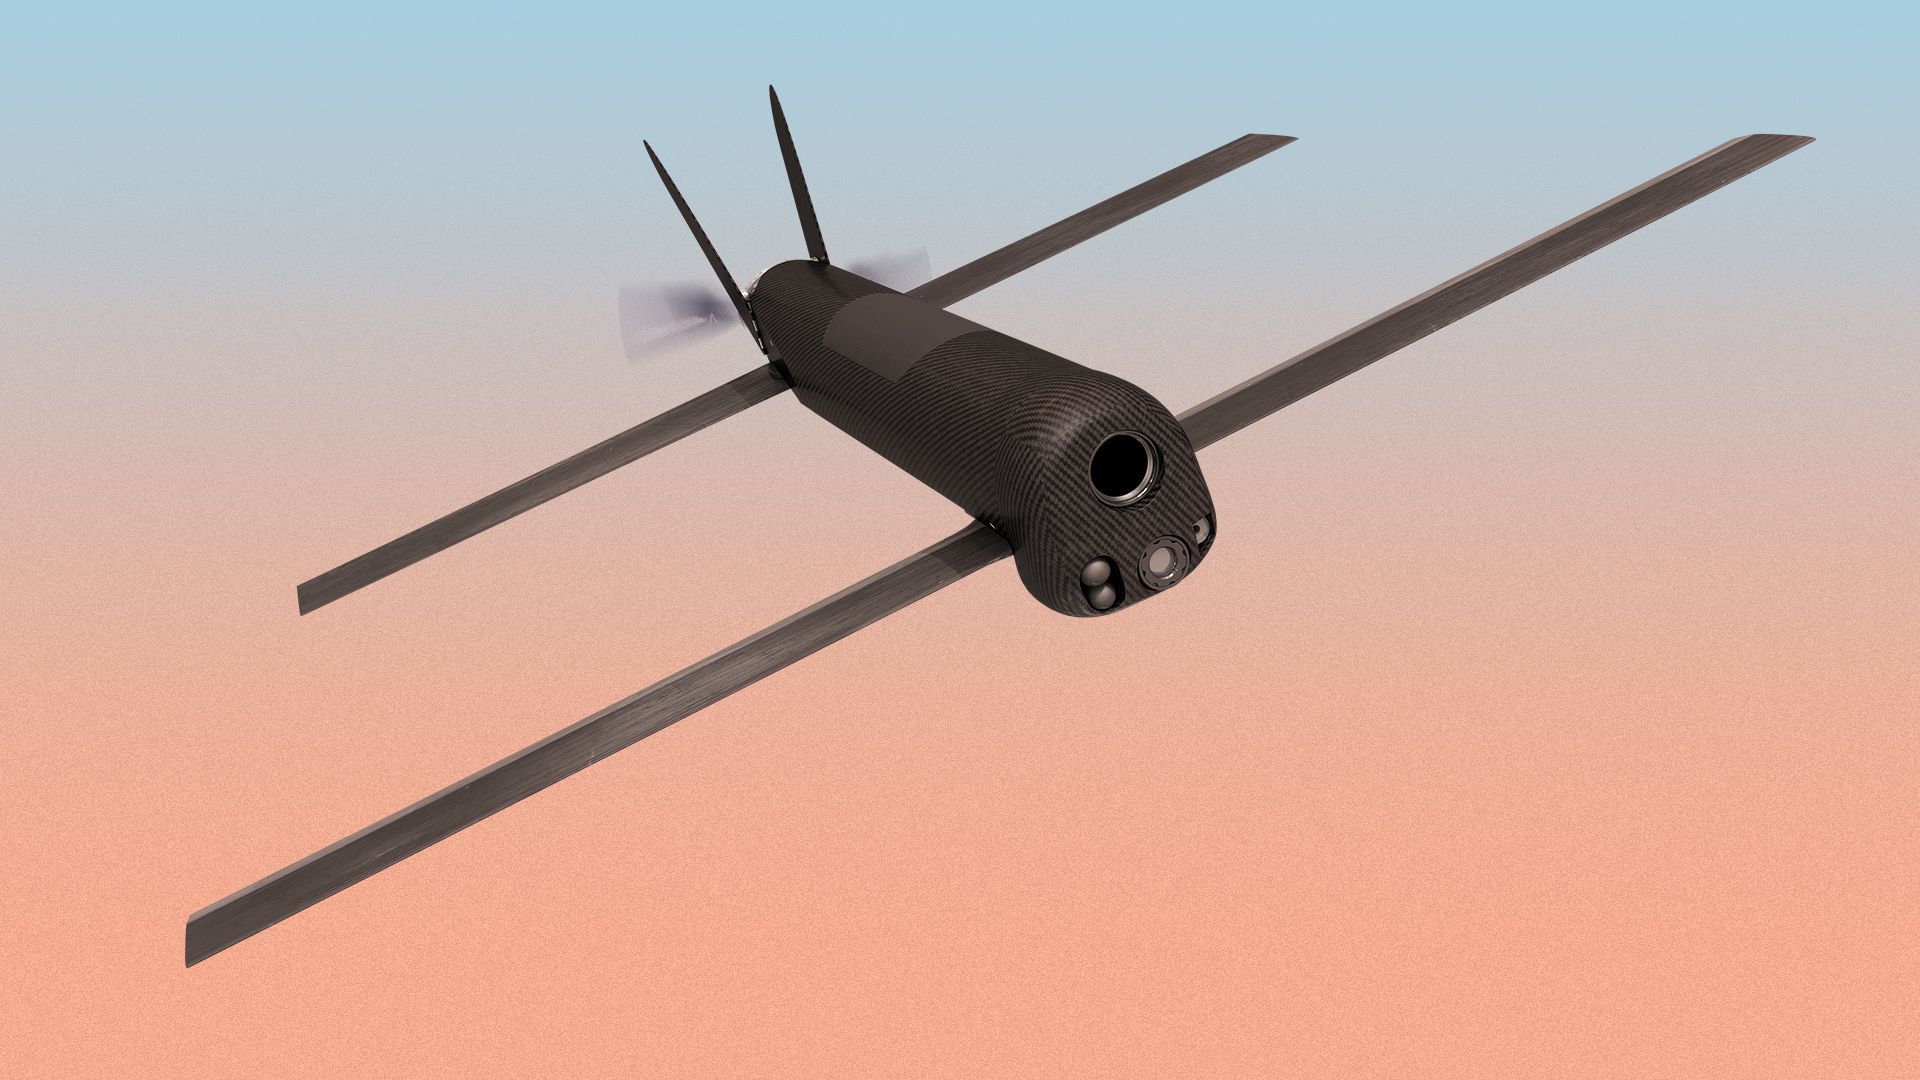 Photo illustration of the Switchblade 300 drone.